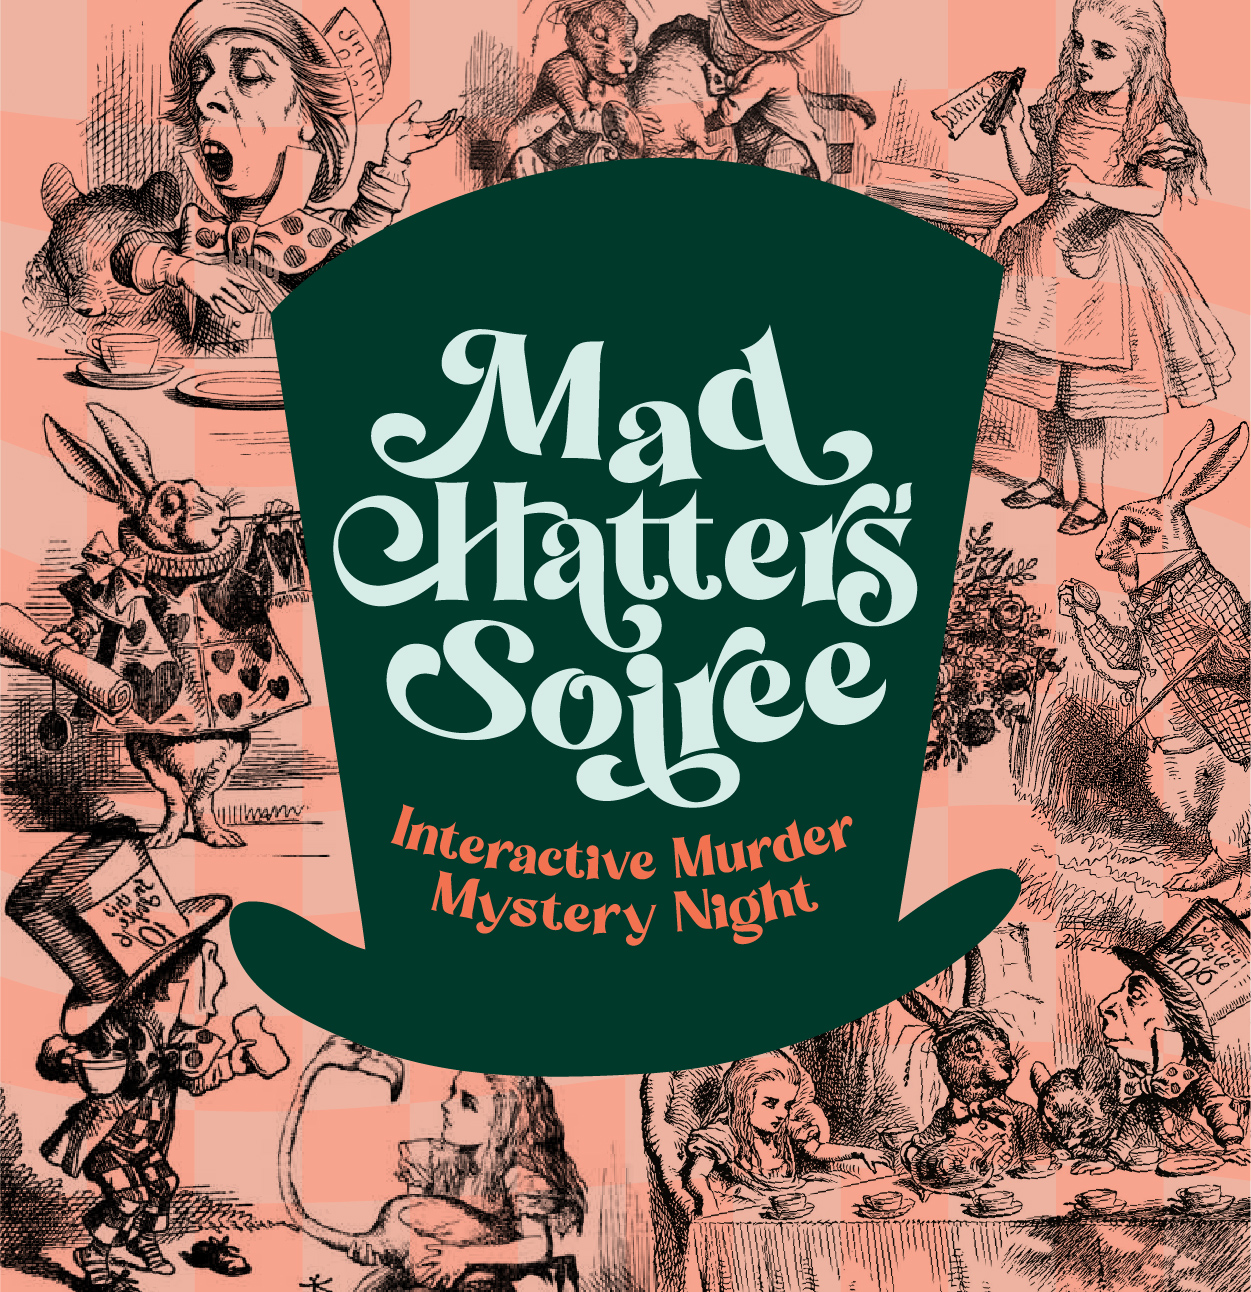 Mad Hatter's Soiree Interactive Murder Mystery Night